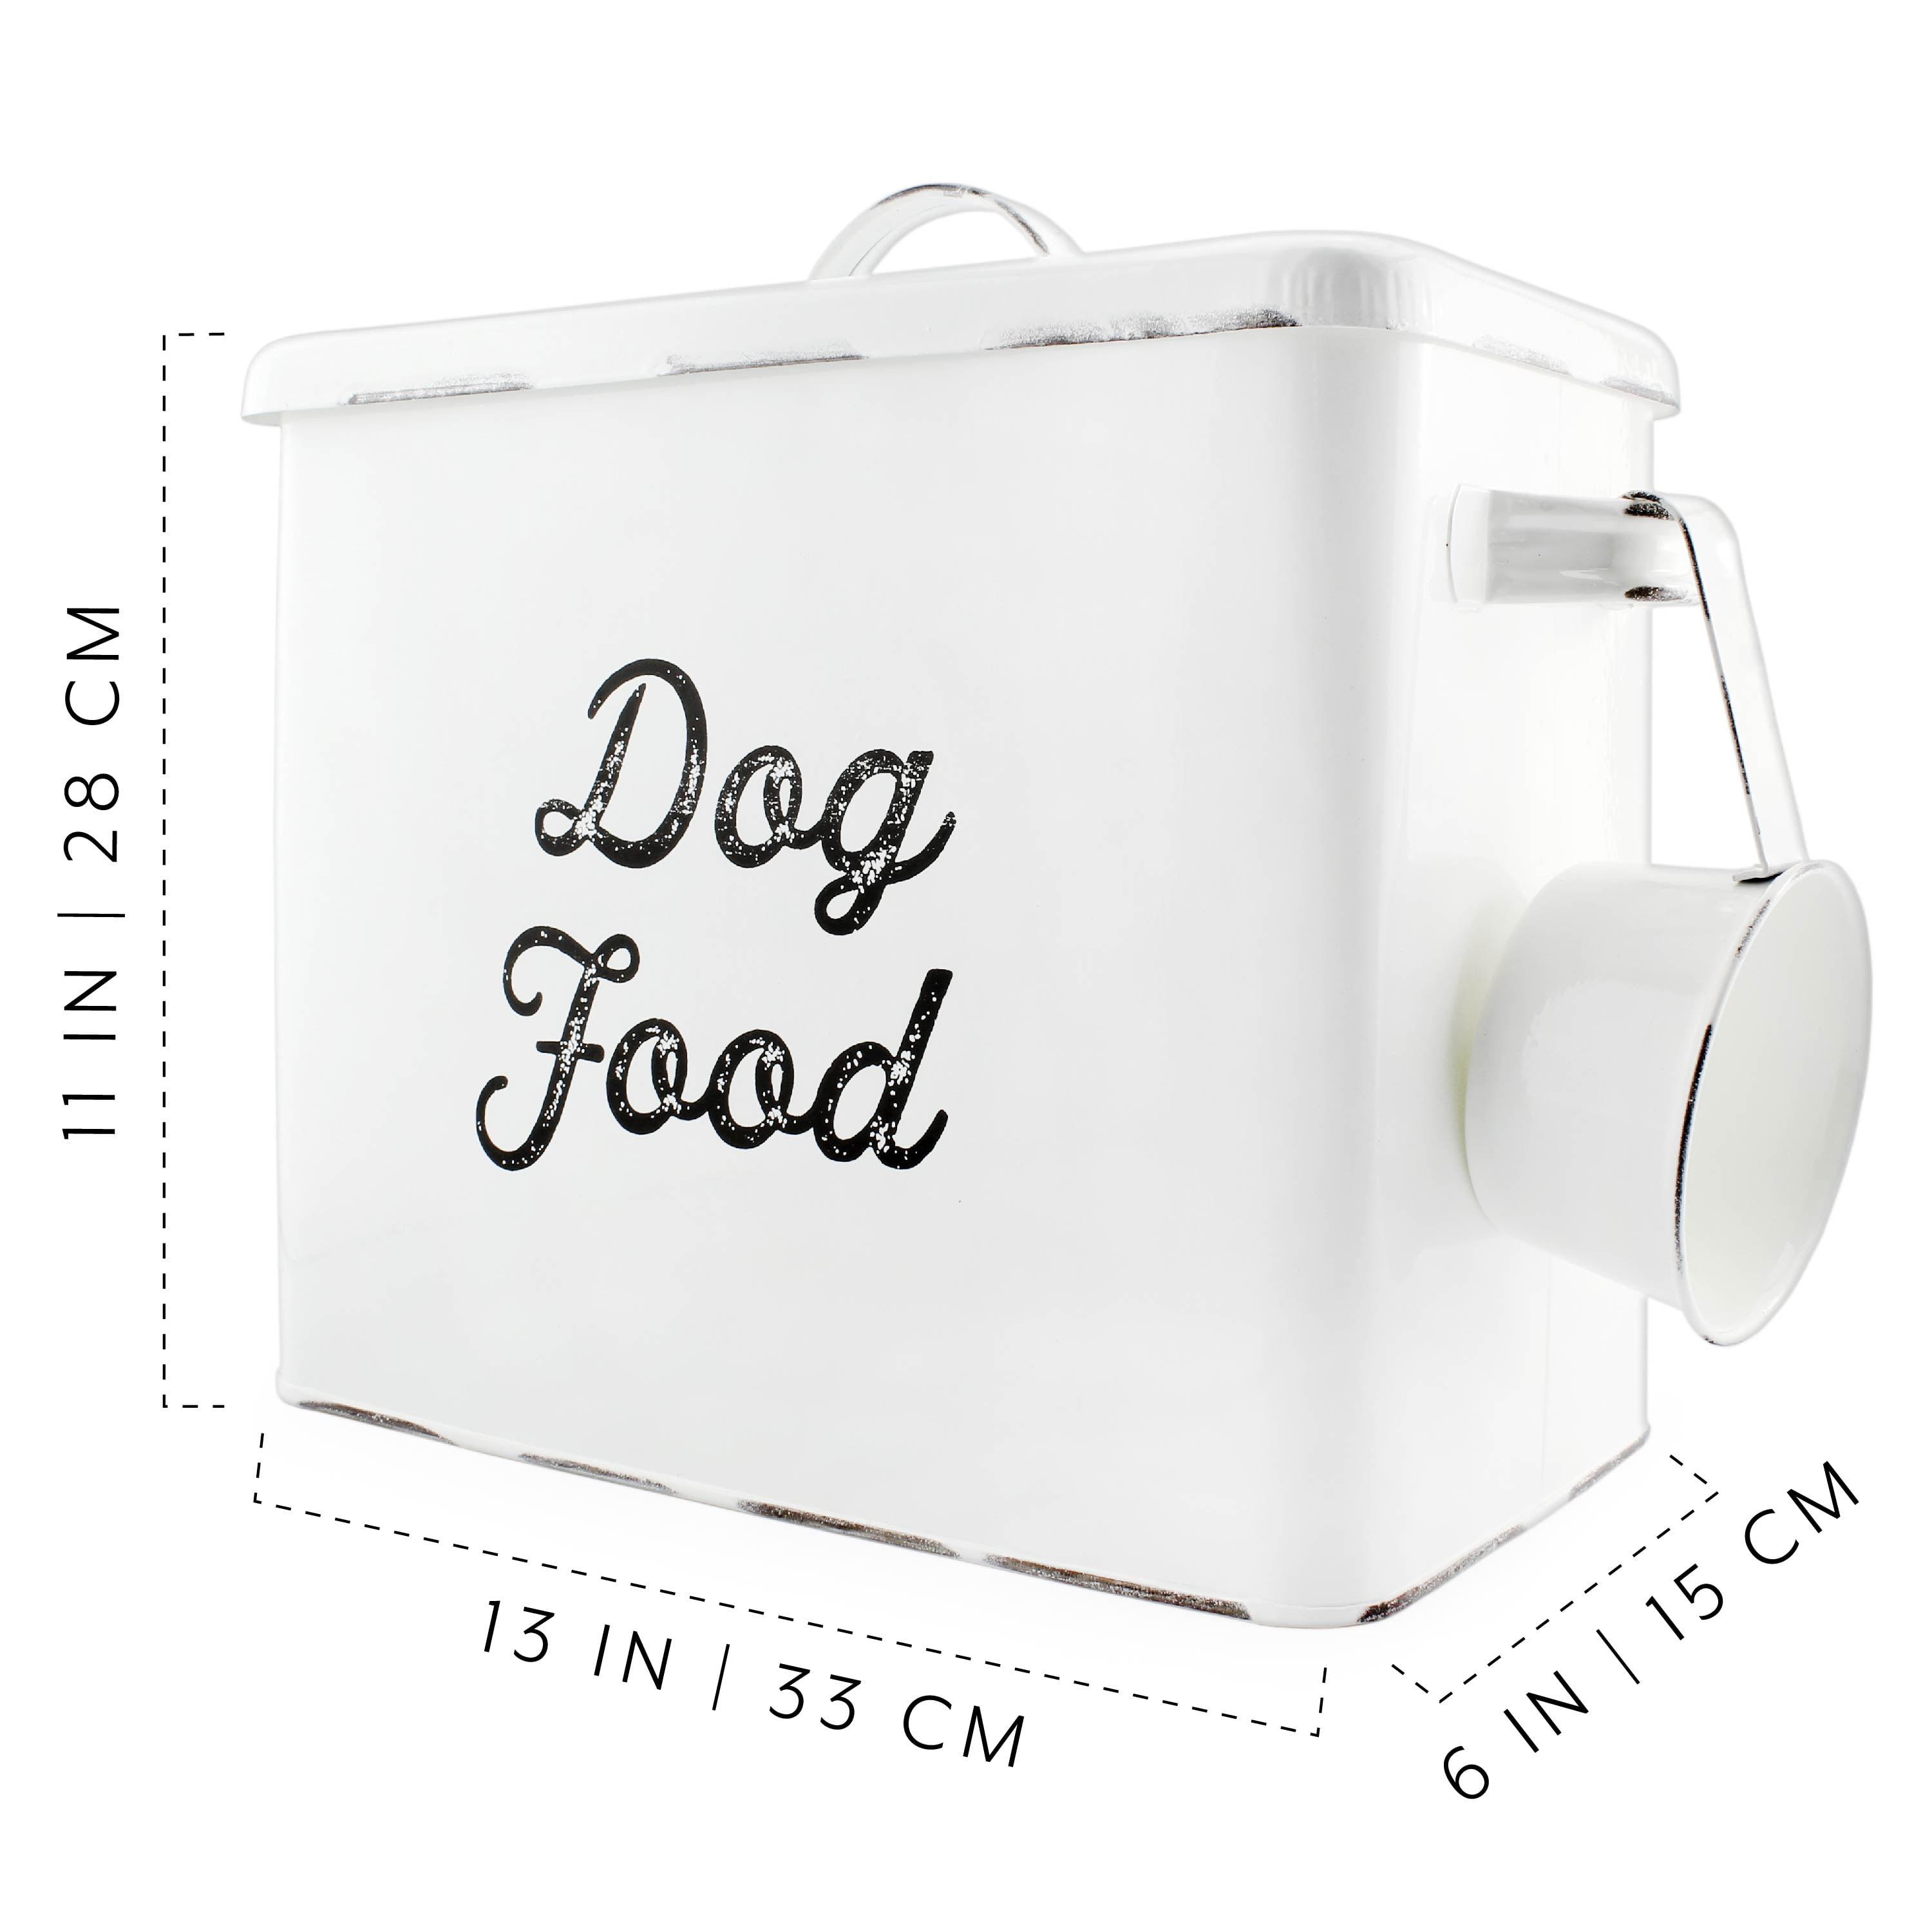 Outshine White Farmhouse Metal Dog Food Storage Container | Large Dog Food Canister with Fitted Lid | Cute Container for Dog Food | Decorative Dog